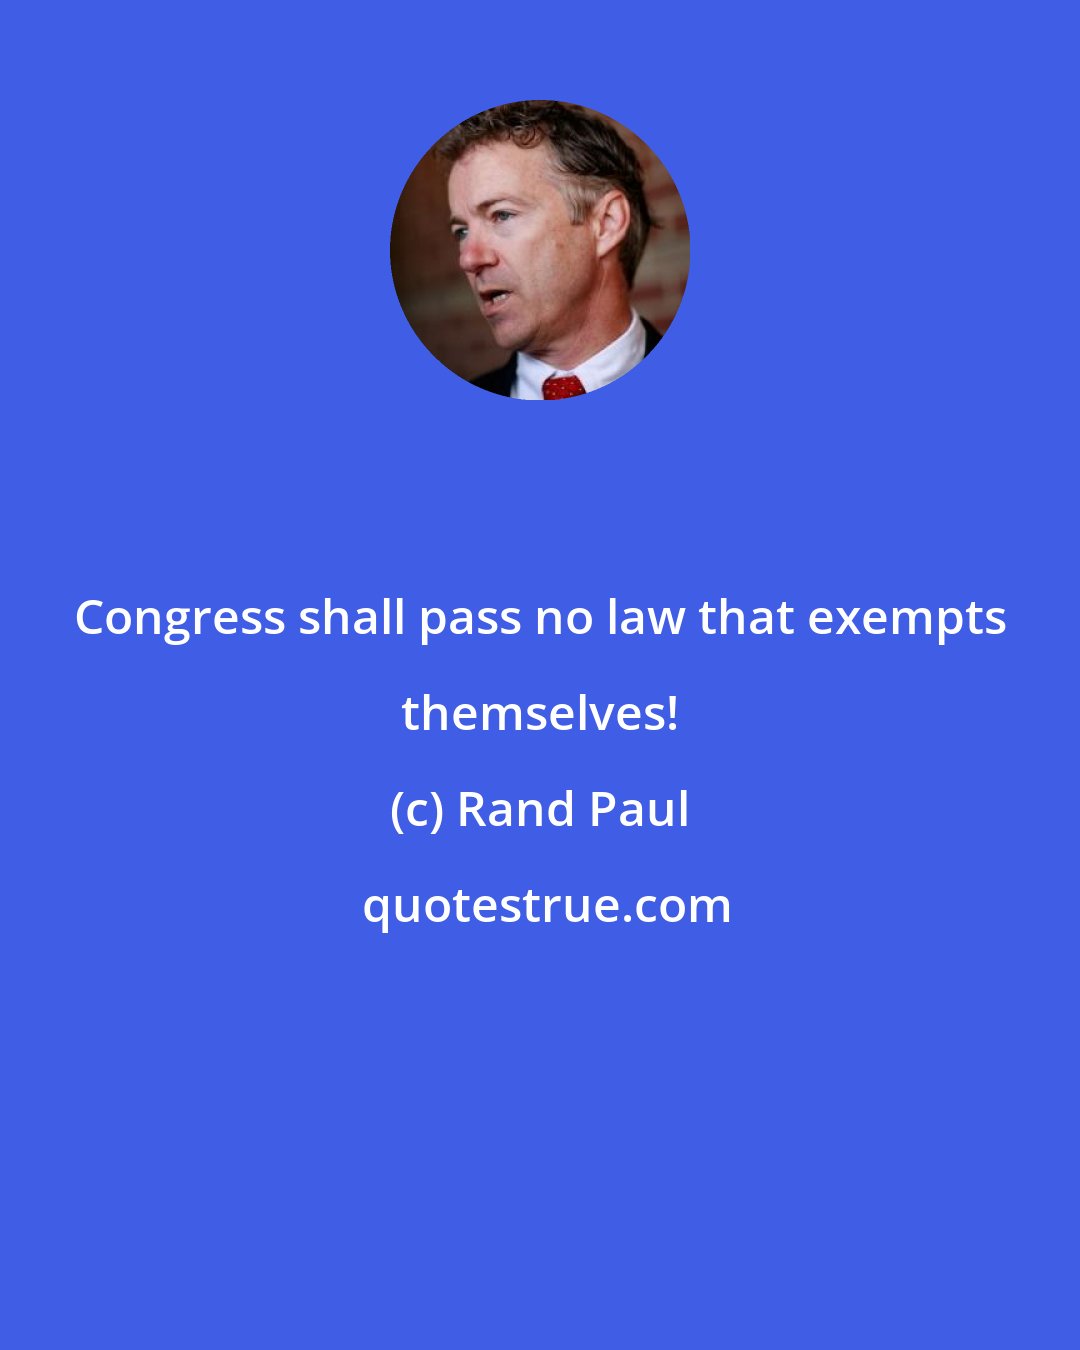 Rand Paul: Congress shall pass no law that exempts themselves!